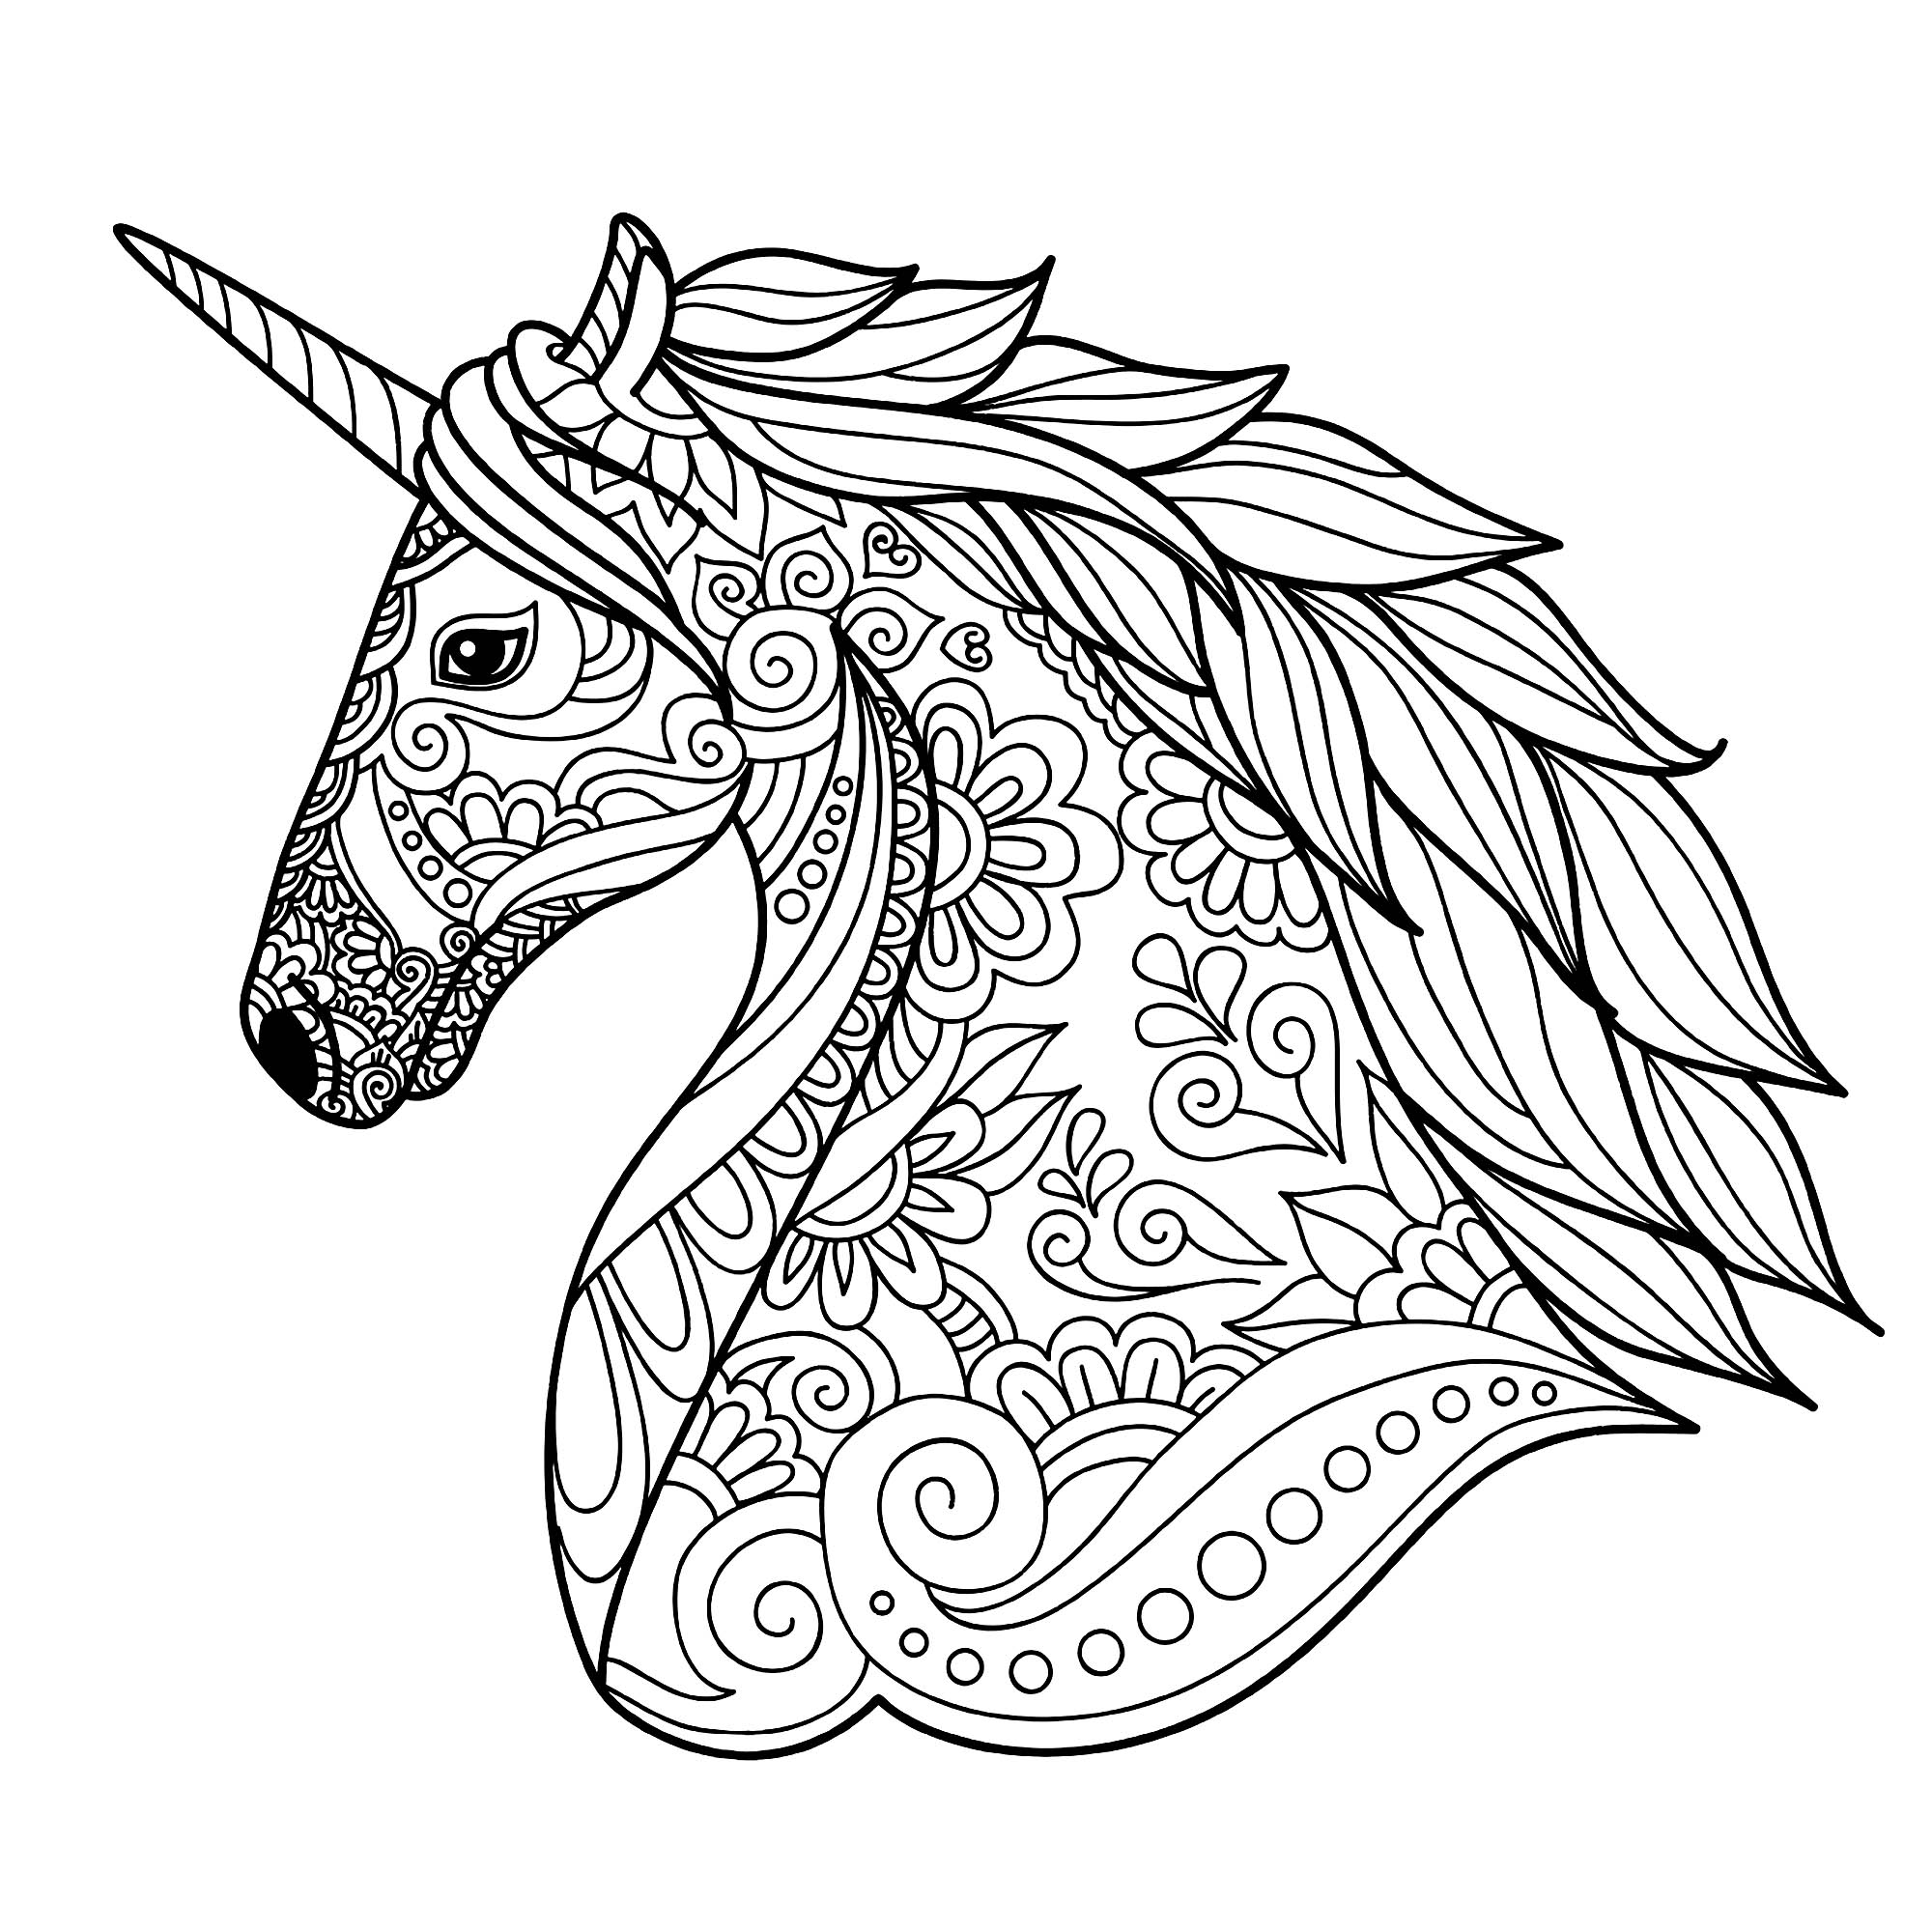 Unicorn picture to color, easy for kids